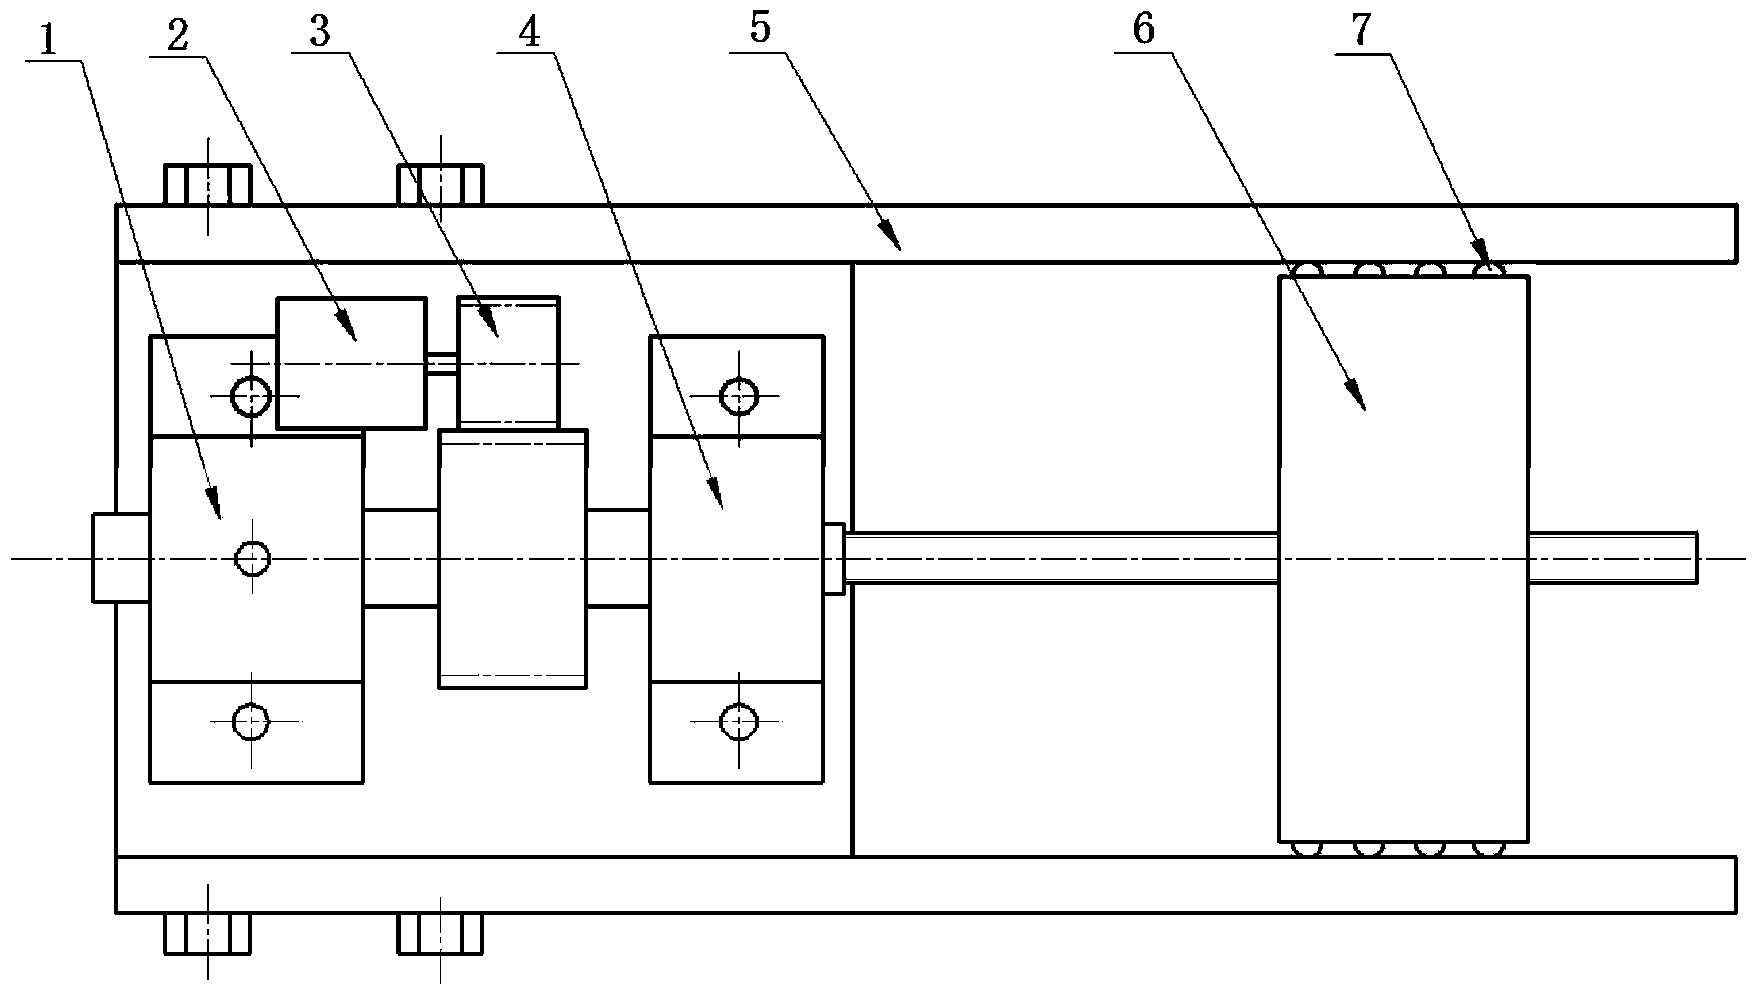 Passive/active-selectable cantilever type dynamic vibration absorber